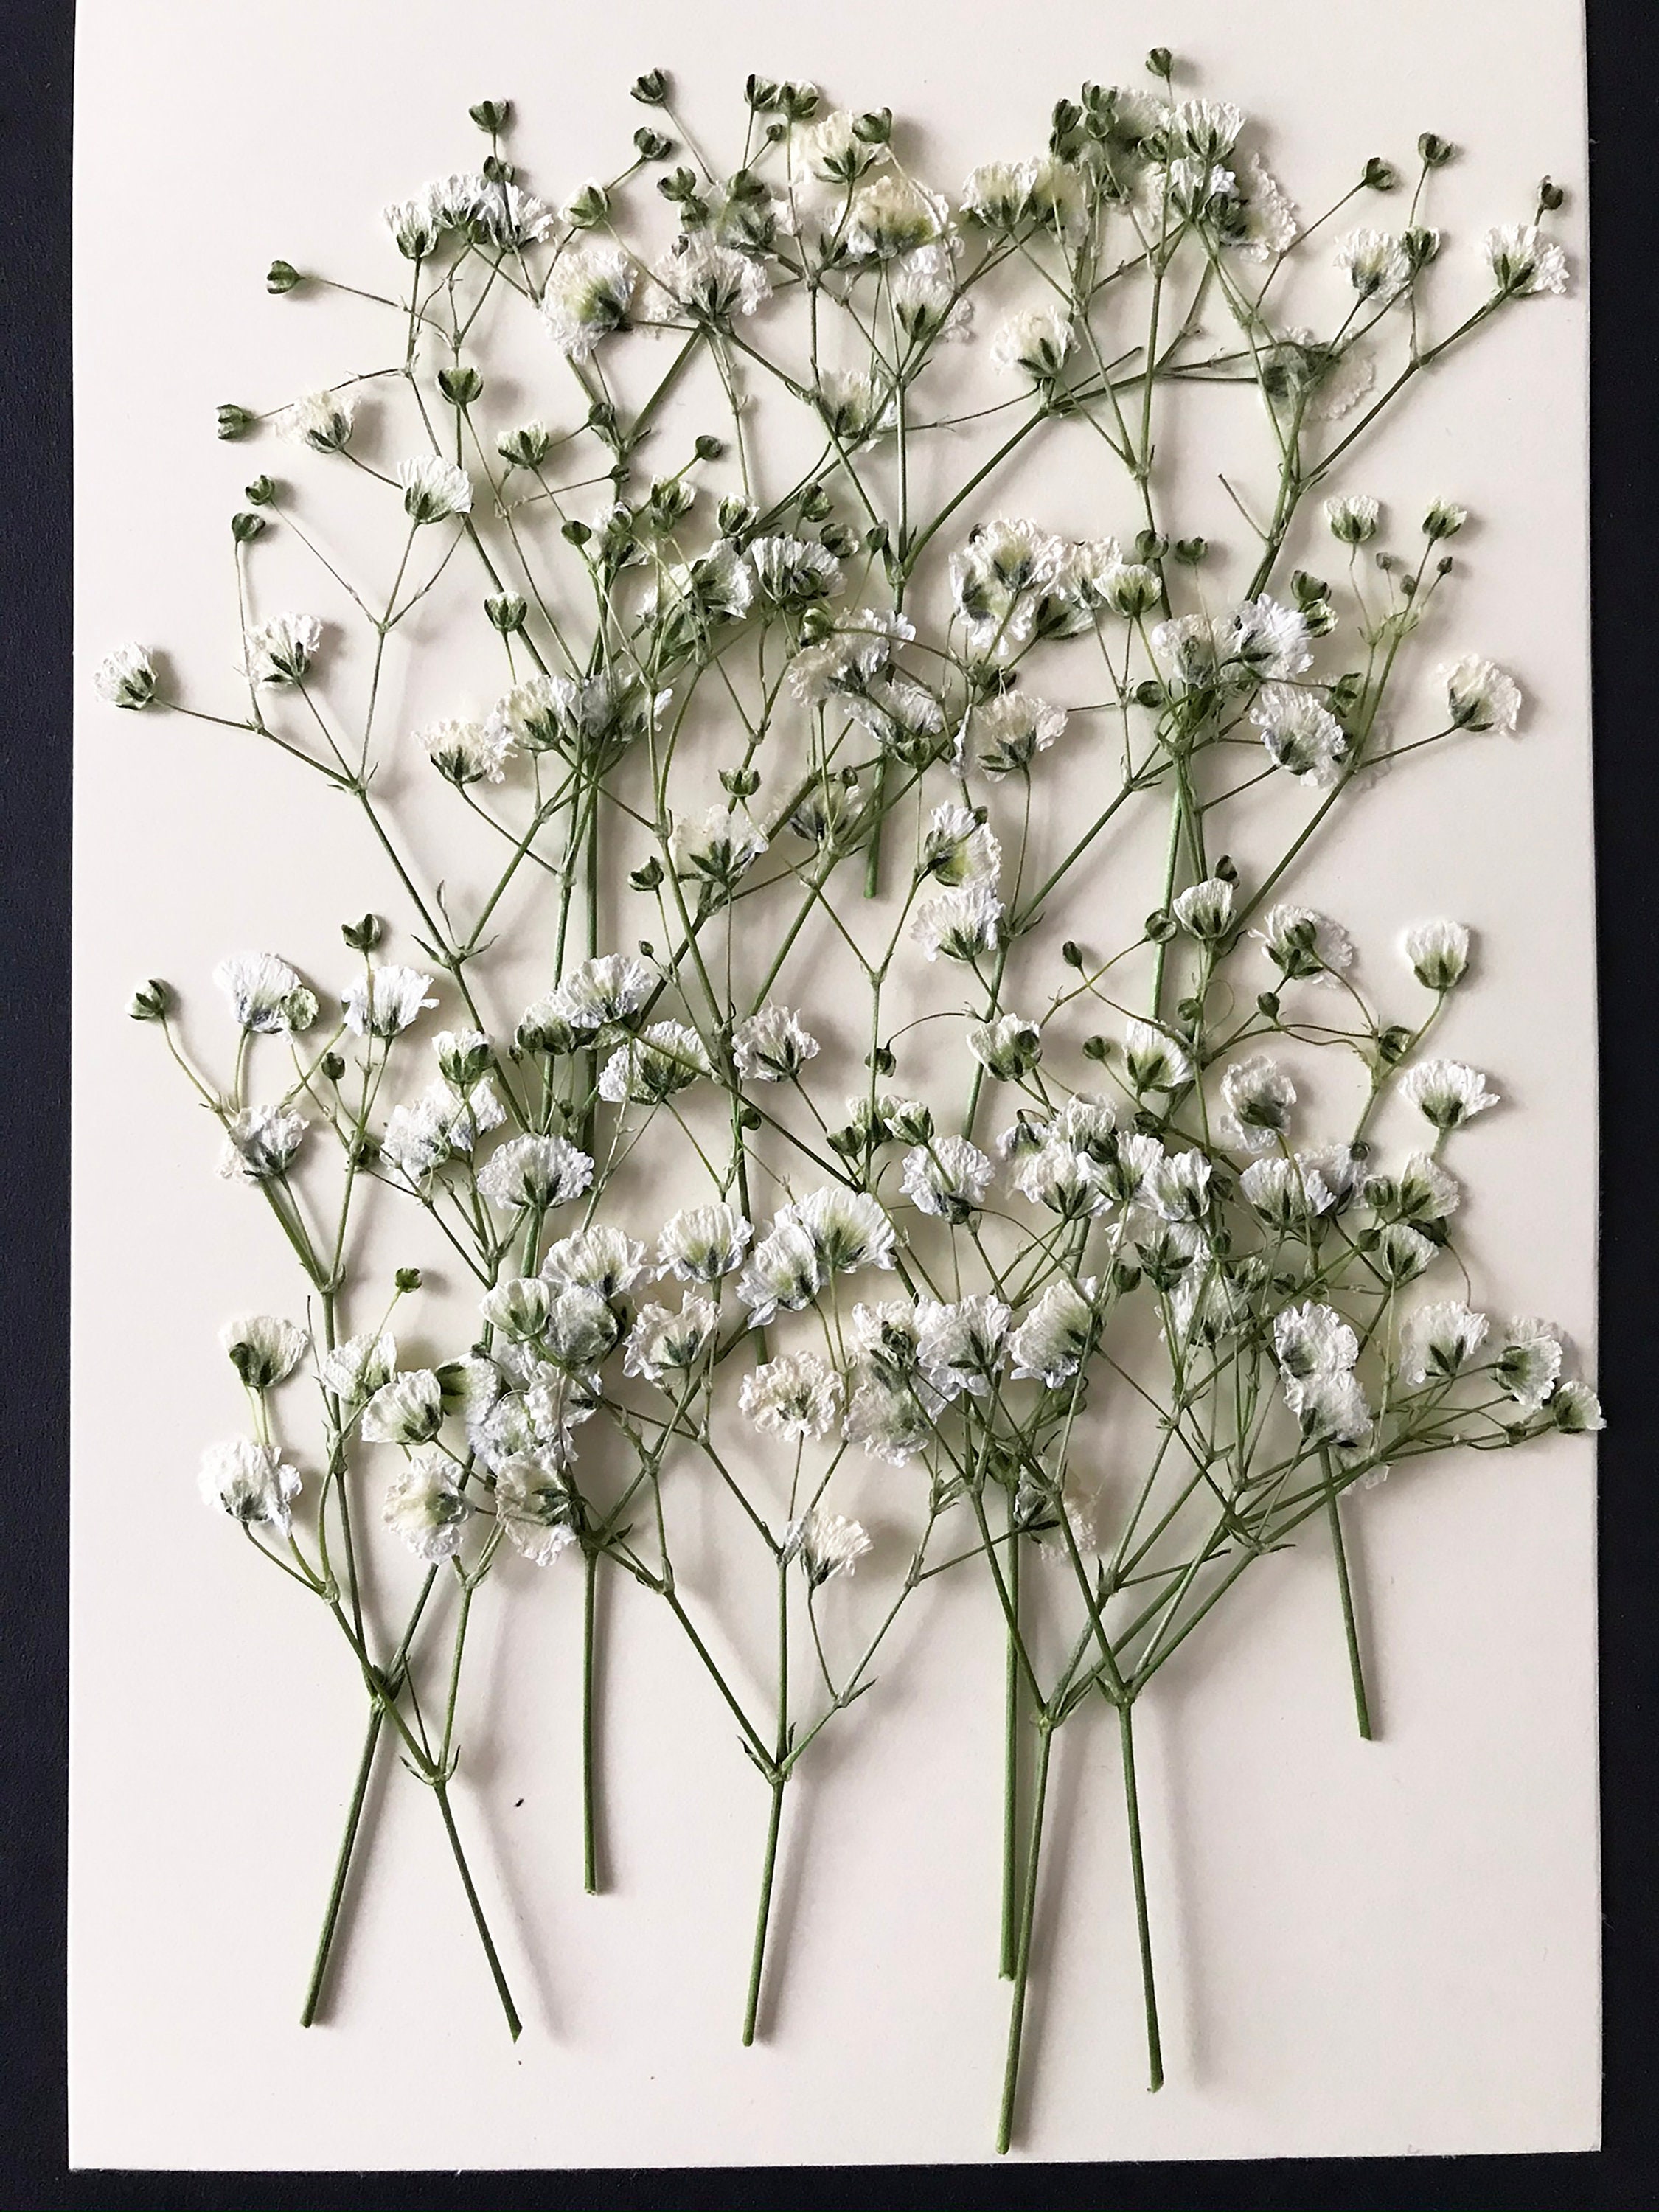 16 Pcs White Baby'S Breath Real Natural Dried Pressed Flowers for